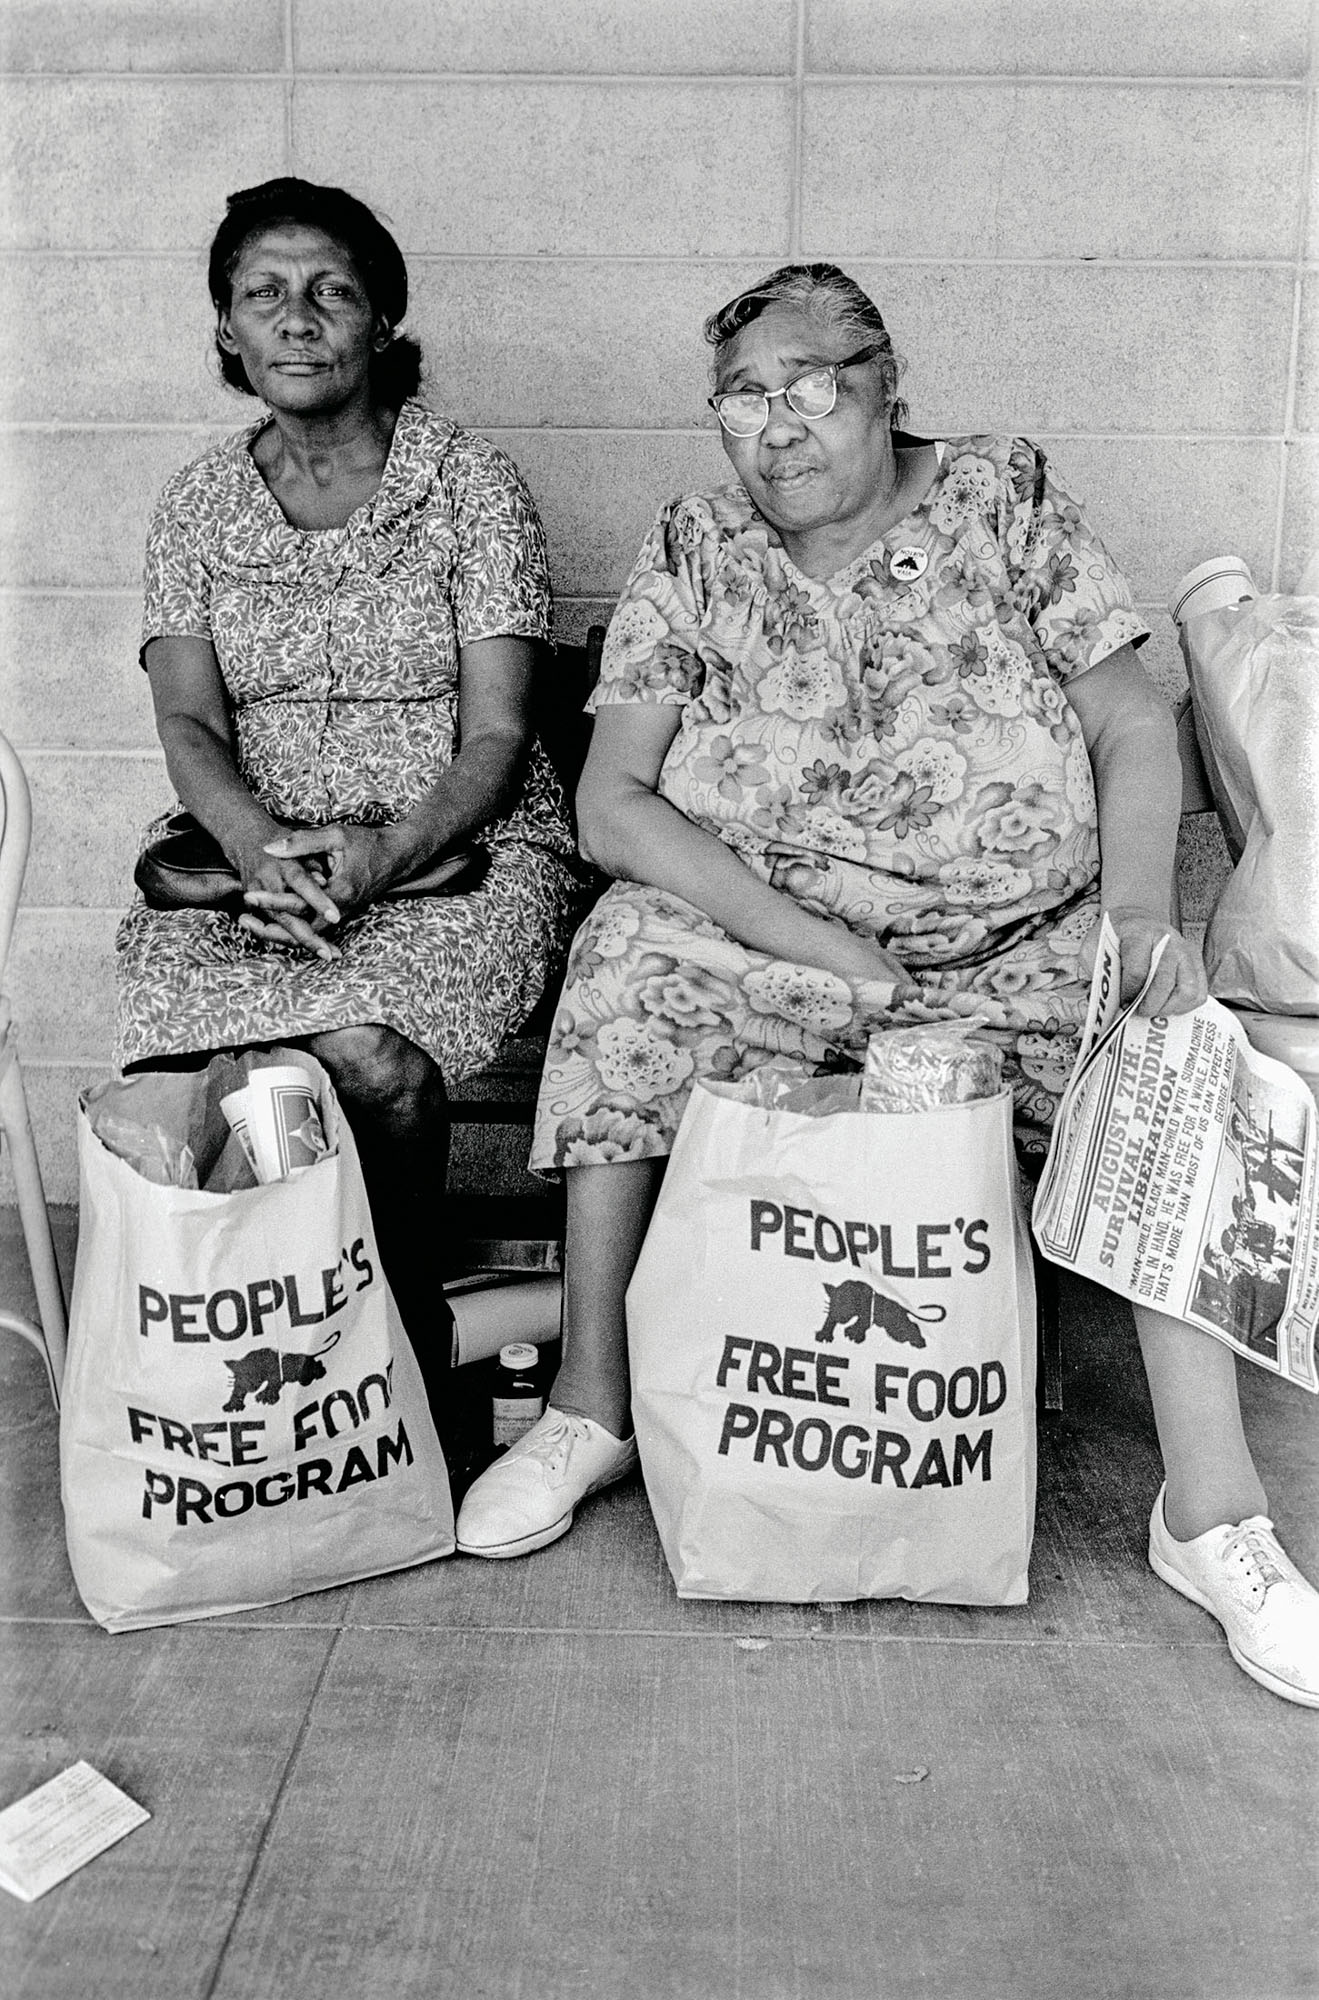 1972 - Palo Alto, California: Two women wi th bags of food at the People